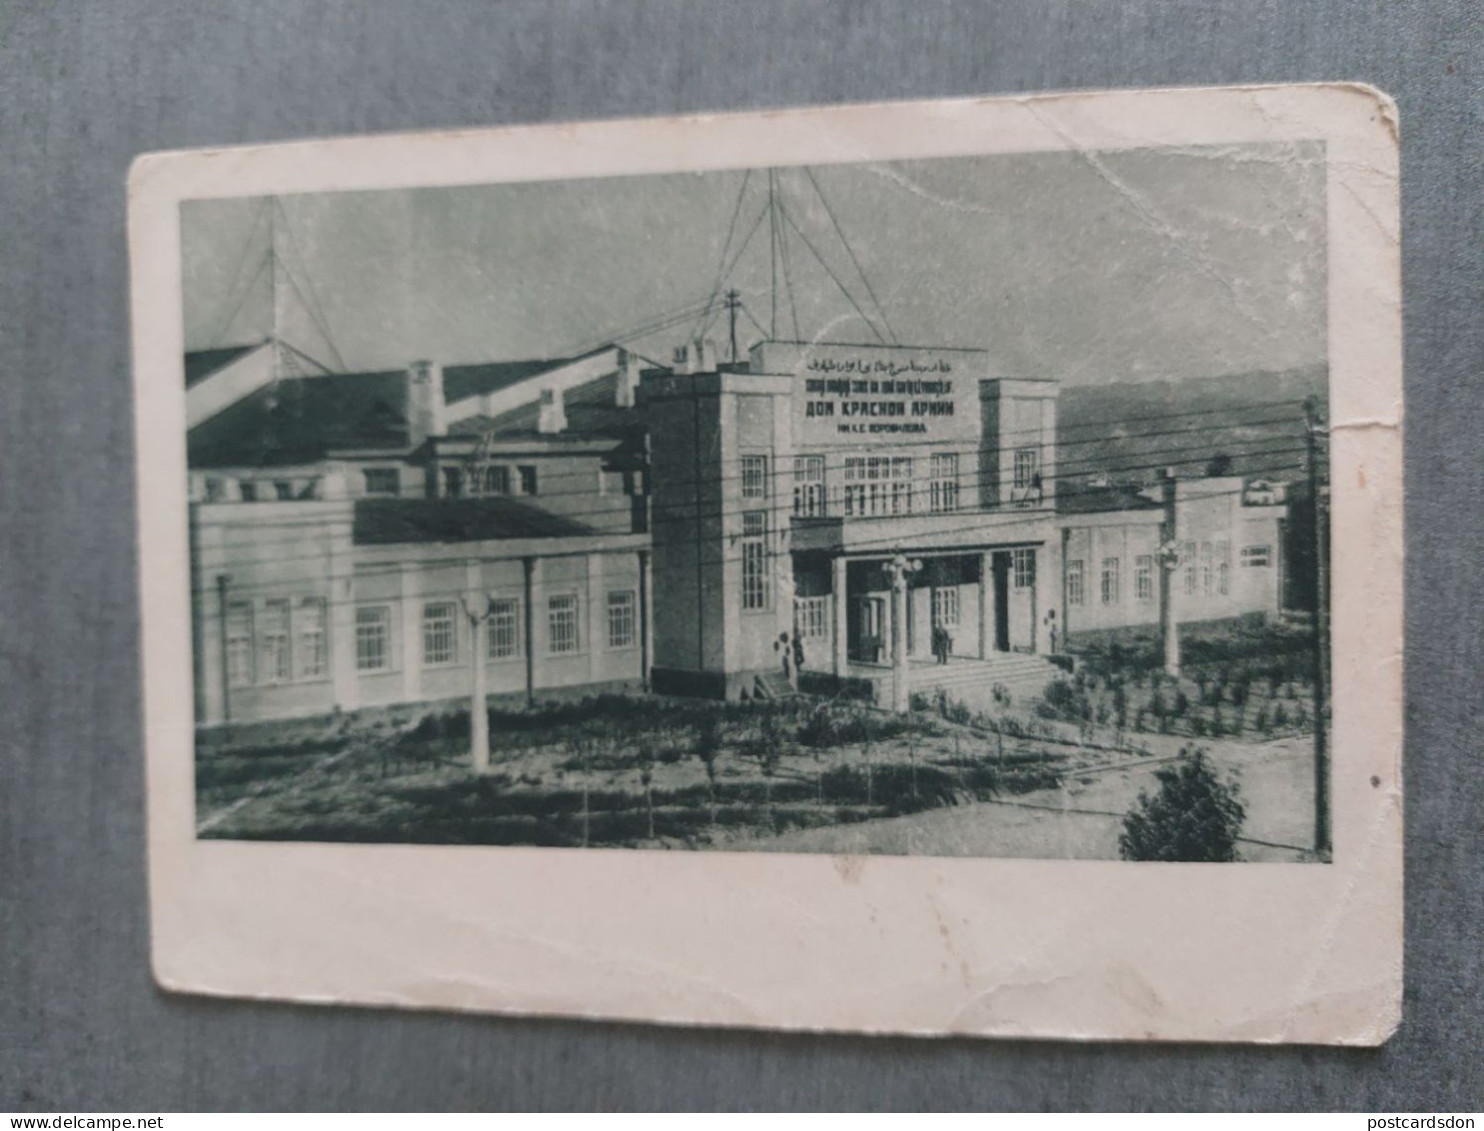 Tajikistan. STALINABAD CITY (DUSHANBE). Red Army House - CONSTRUCTIVISM - Old USSR PC. 1932 -  Rare! - Tadschikistan